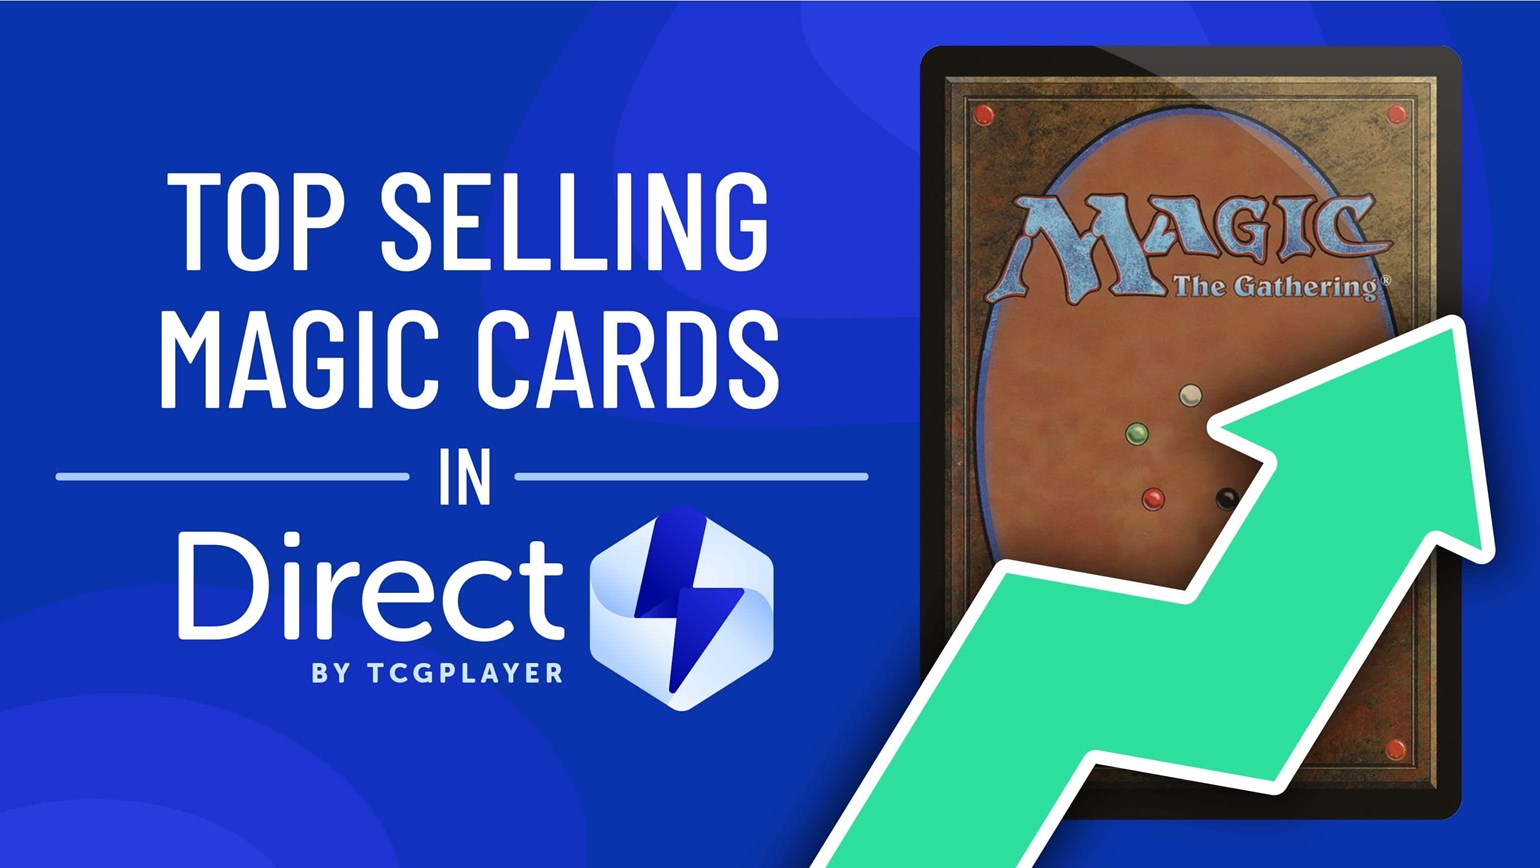 June Top Selling Magic: The Gathering Cards Under $25 in Direct by TCGplayer